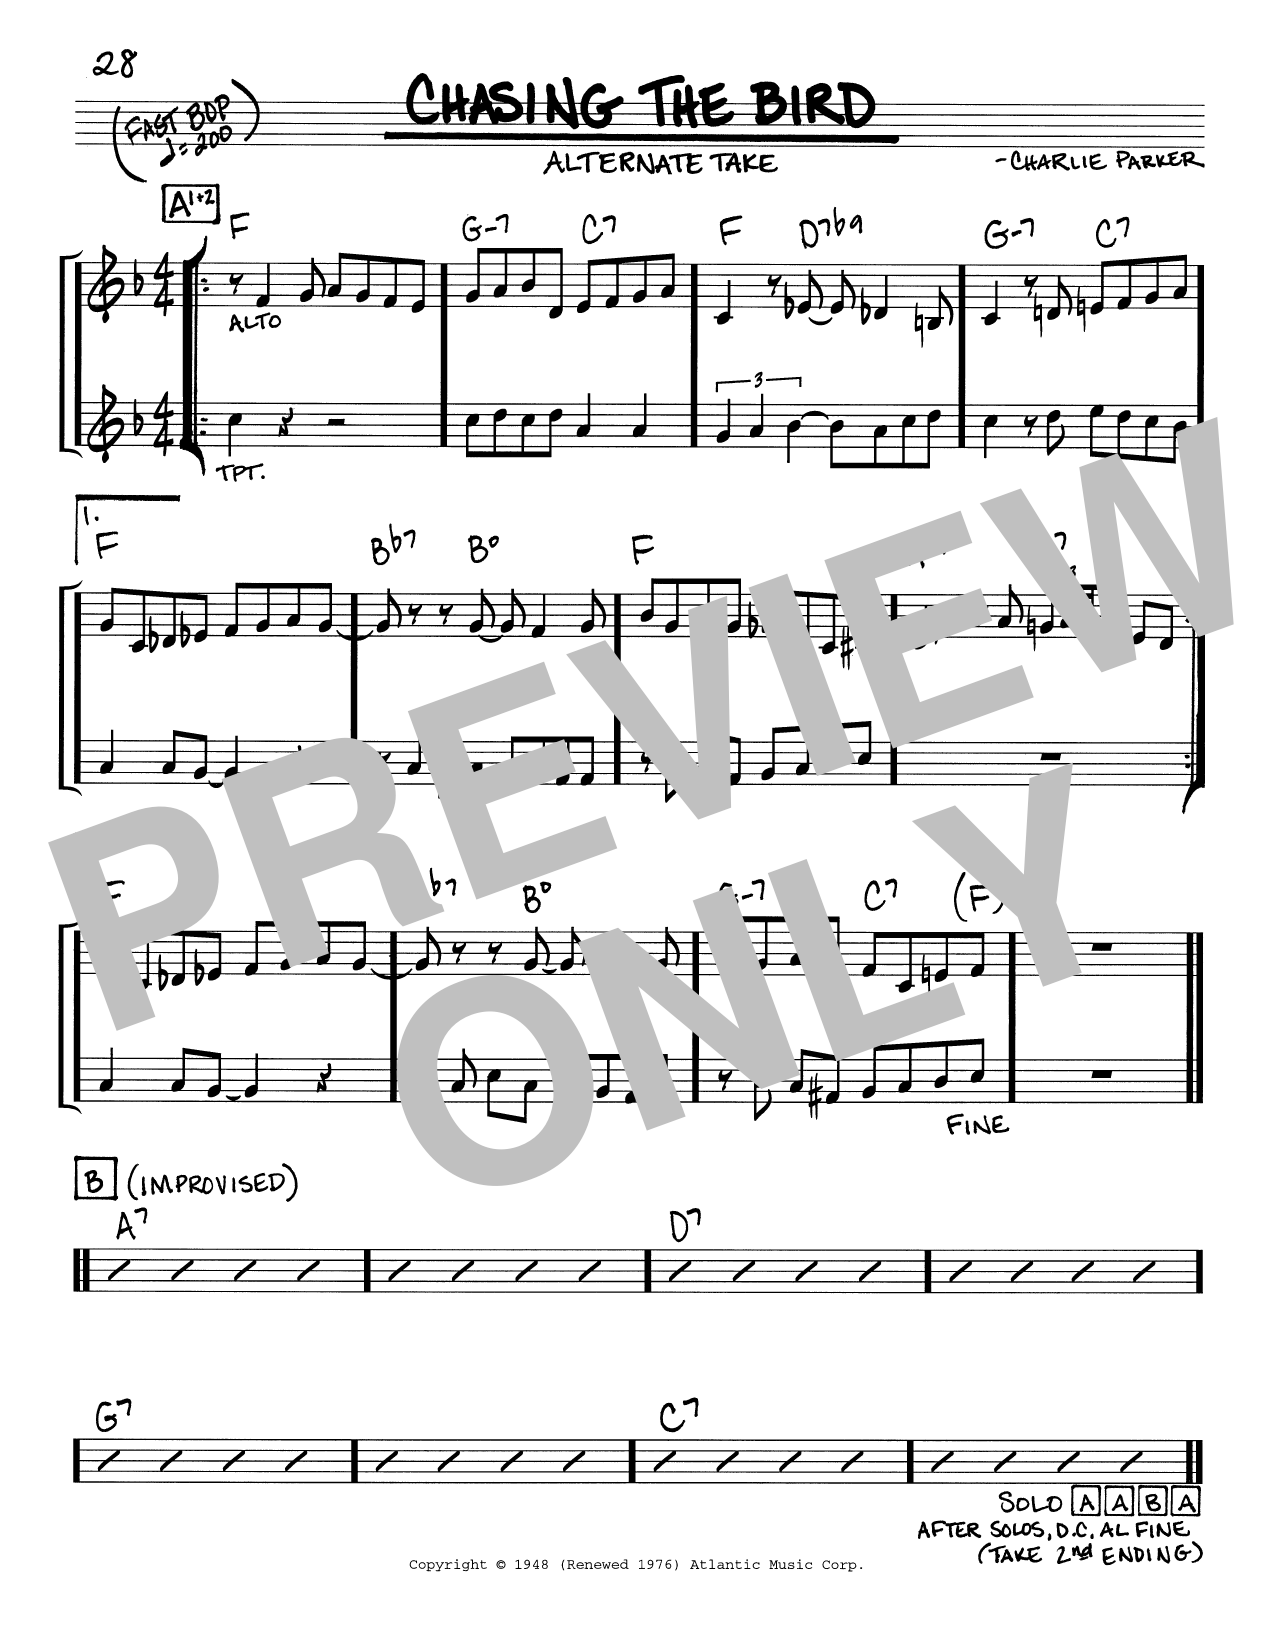 Download Charlie Parker Chasing The Bird Sheet Music